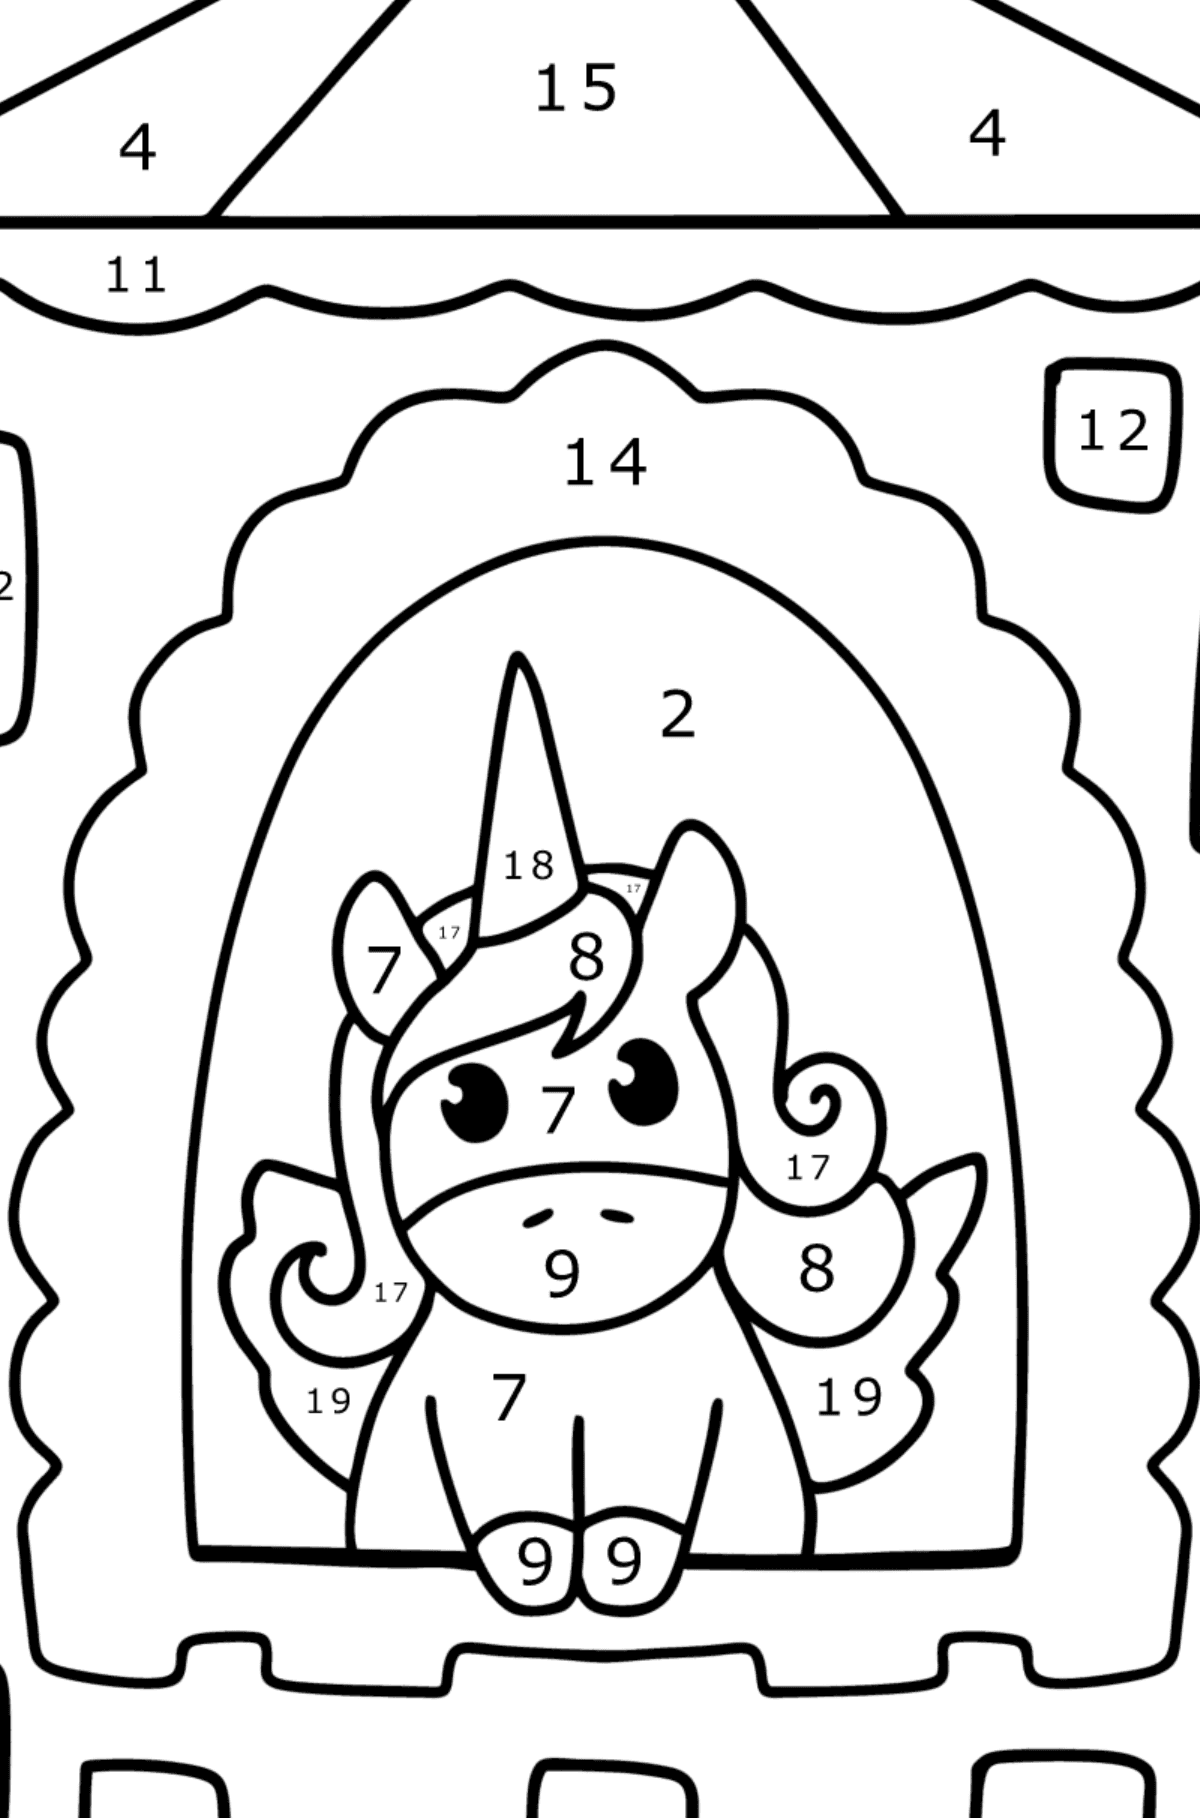 Unicorn in fairyland coloring page - Coloring by Numbers for Kids